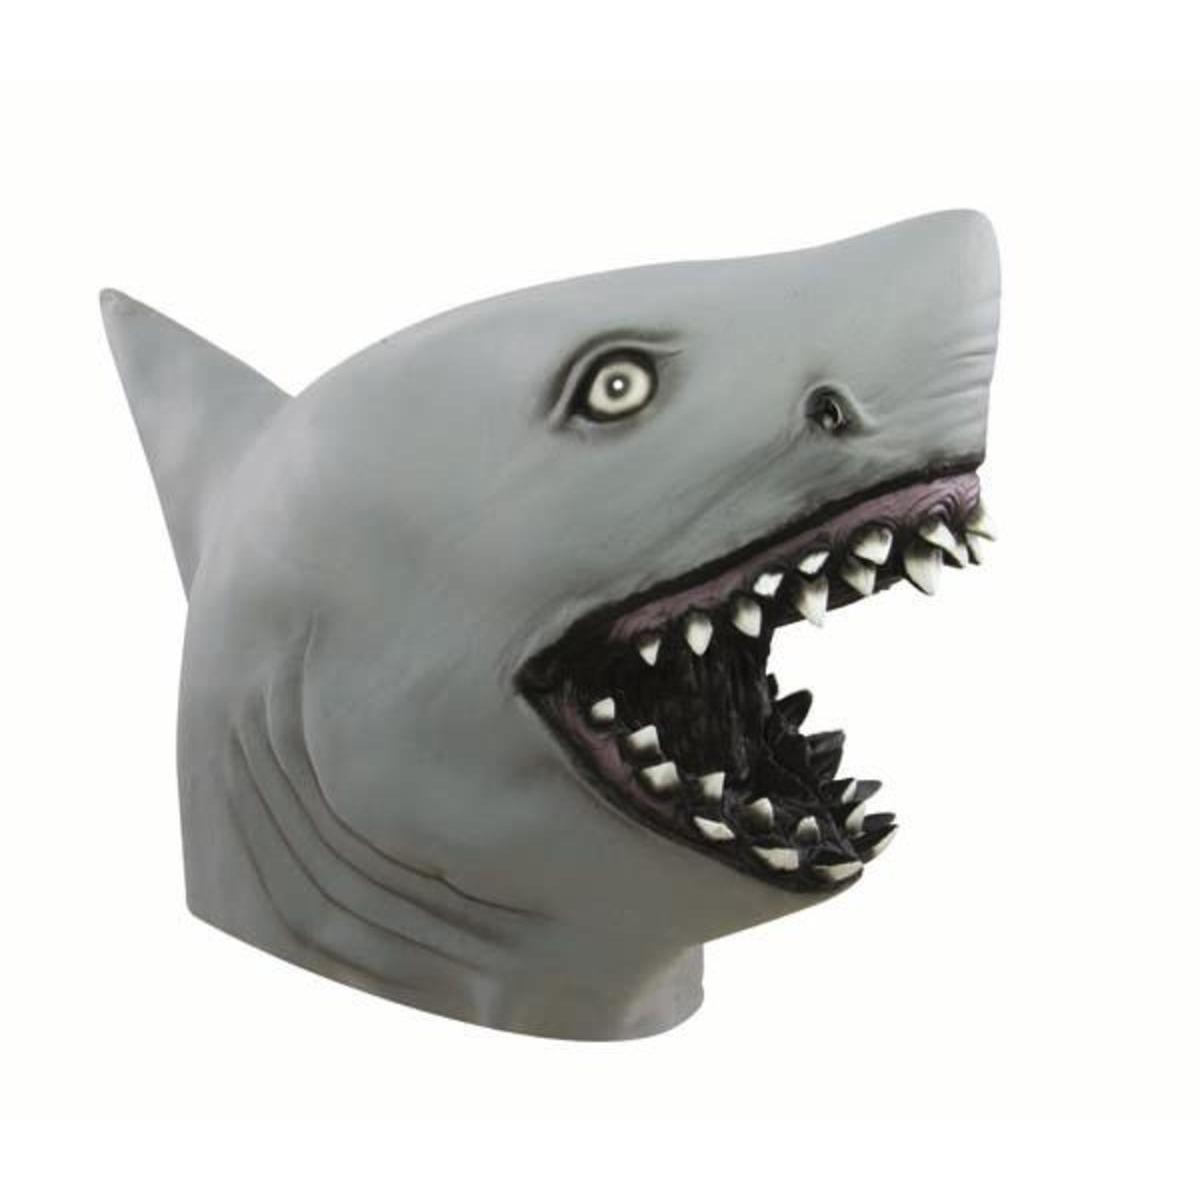 Masque requin - Taille adulte